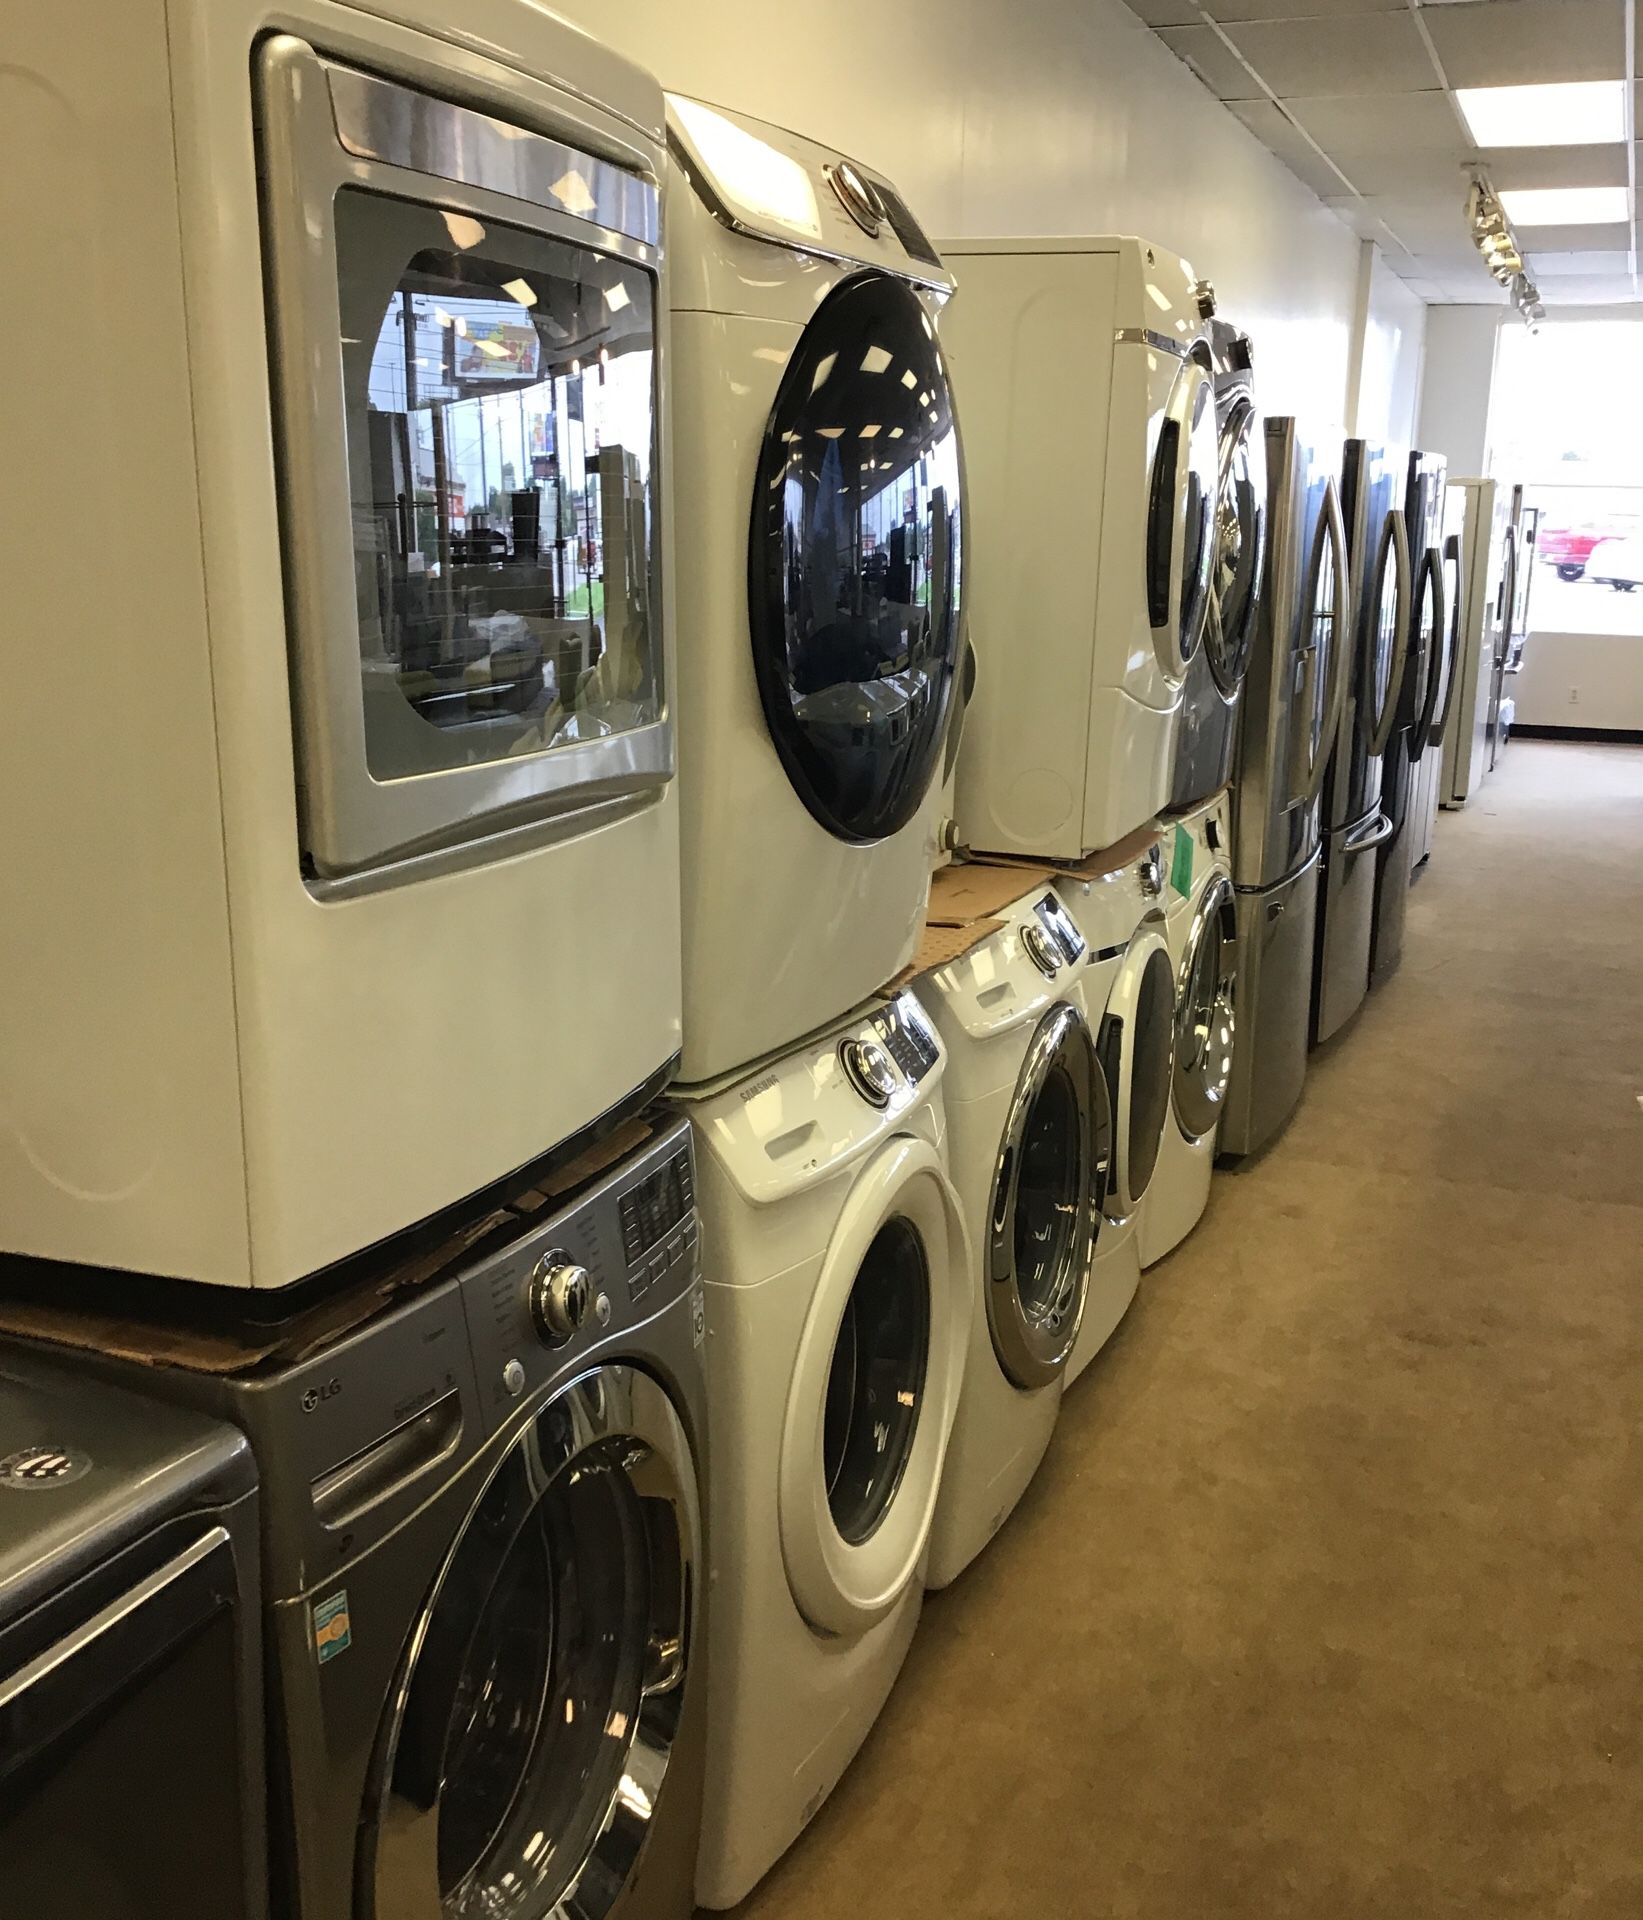 New Scratch and dent Appliances: Washers, Dryers, Stackable, refrigerators,  mini fridge's (message for questions) for Sale in Indianapolis, IN - OfferUp